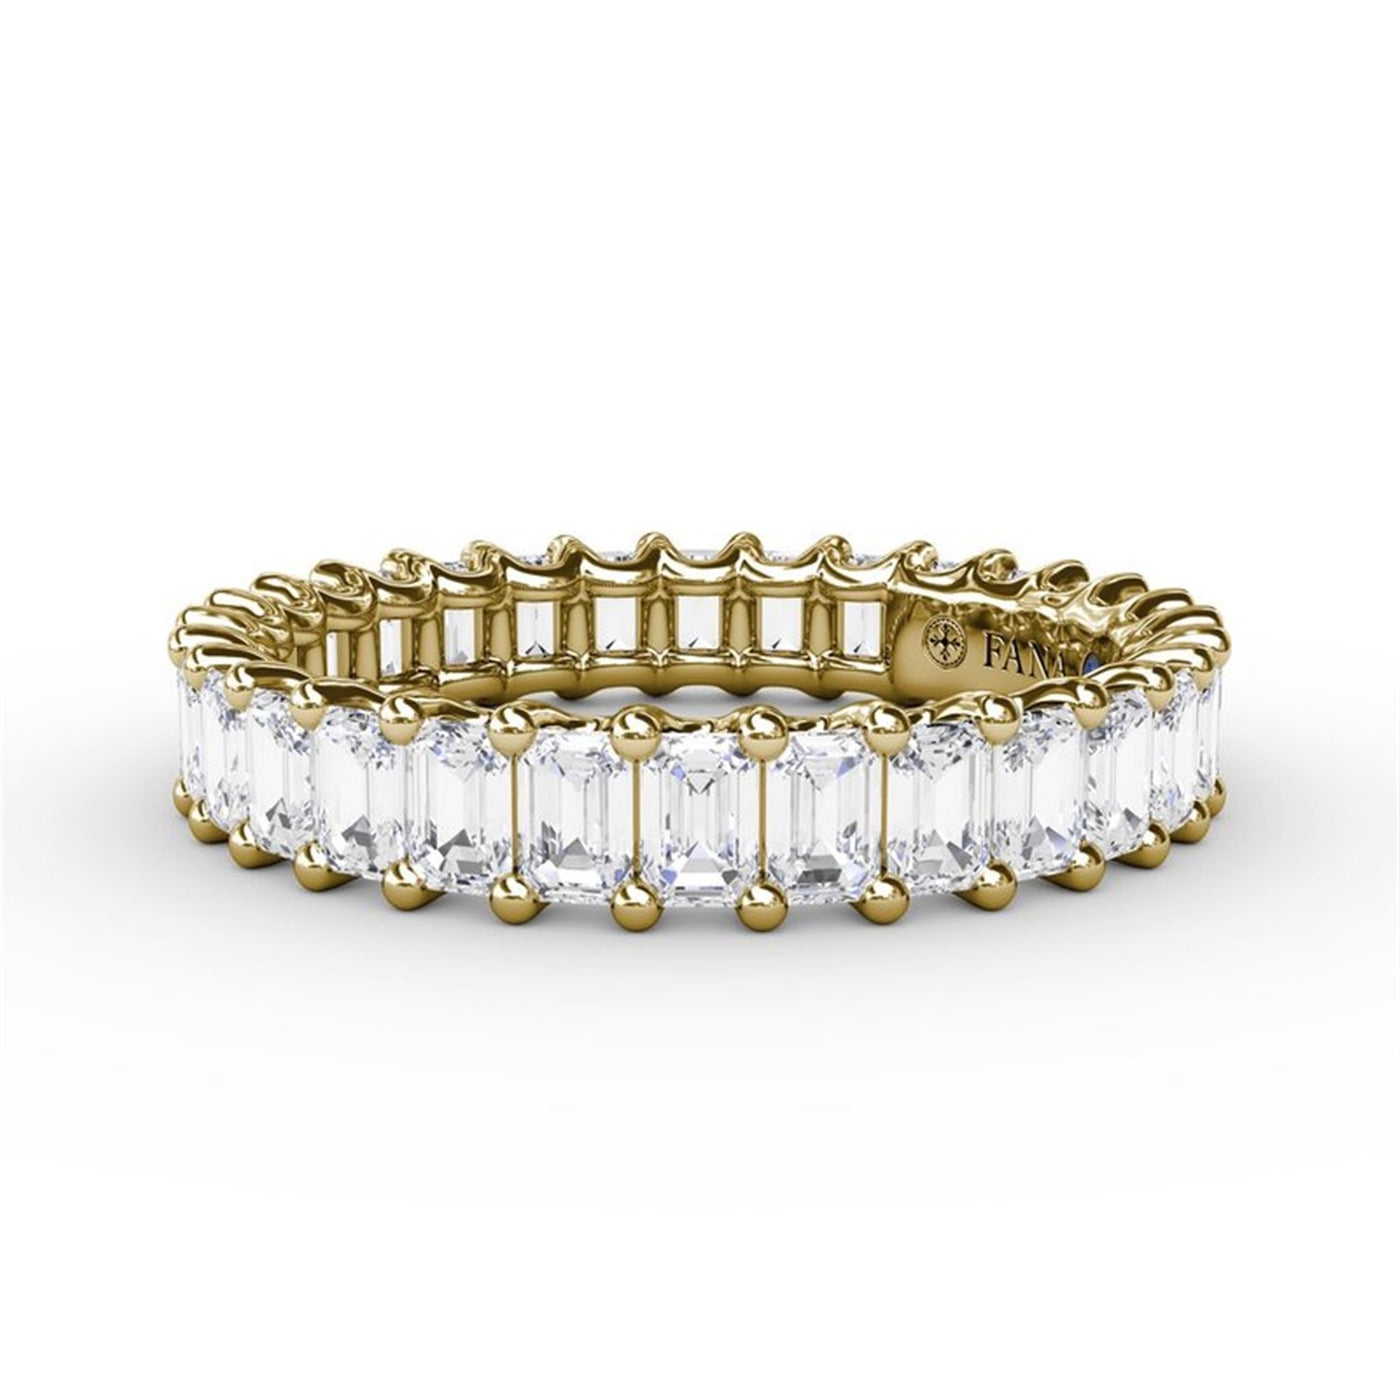 14K Yellow Gold 2.39ctw Diamond Eternity Band 
Featuring a Polished Finish